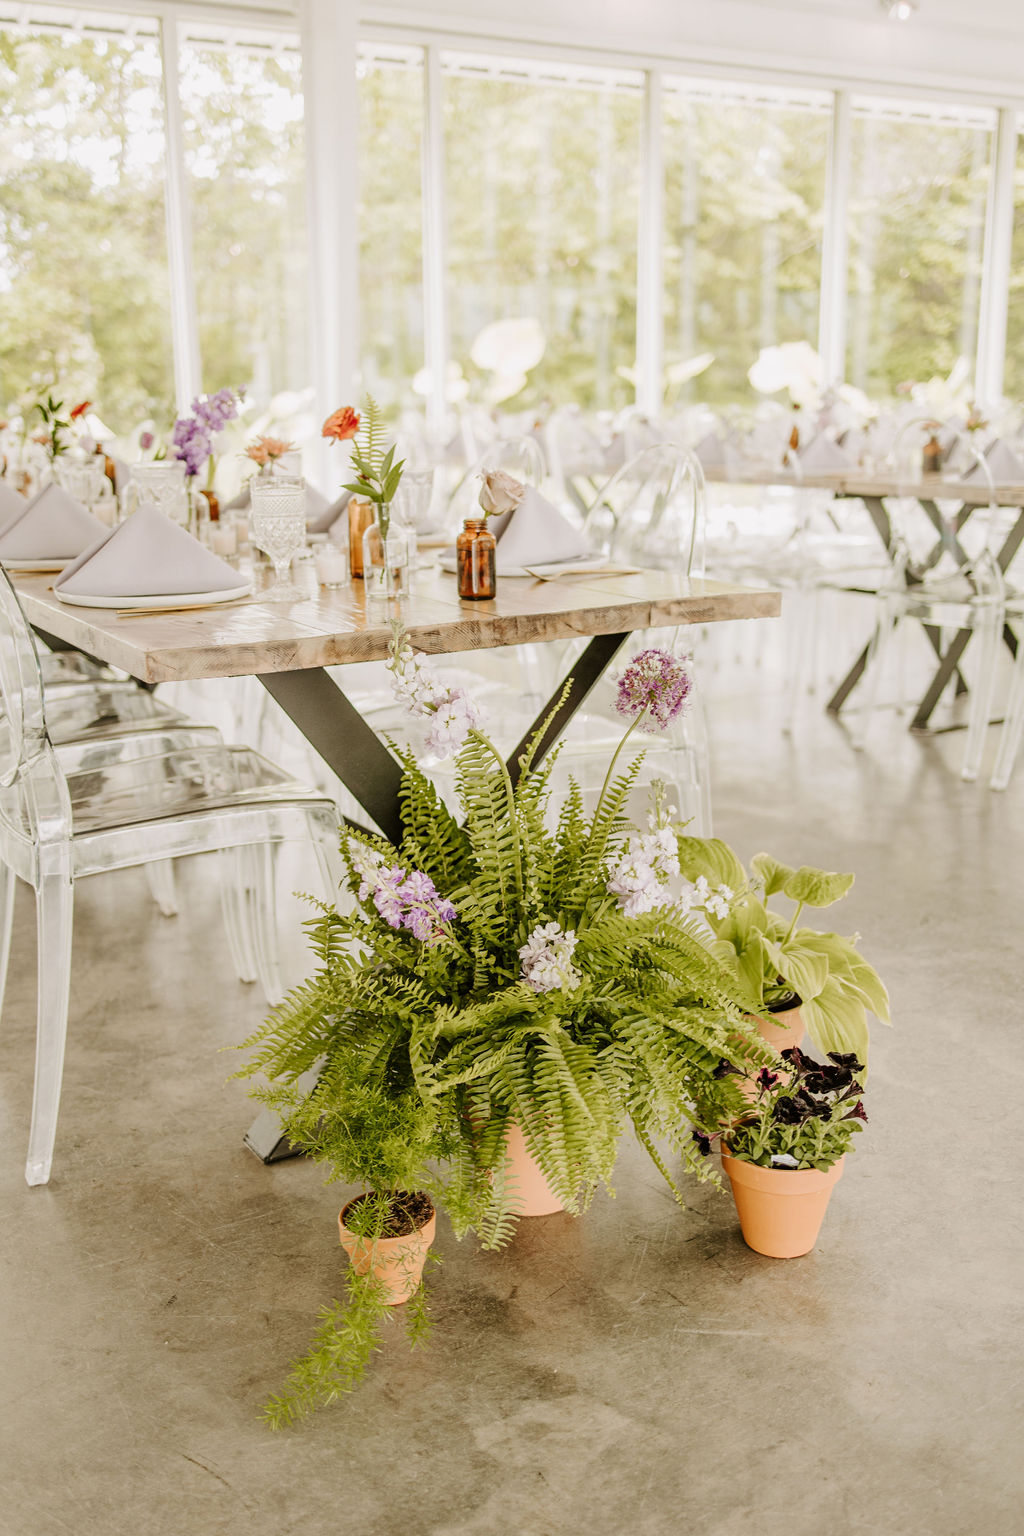 Potted plants at the base of the reception tables